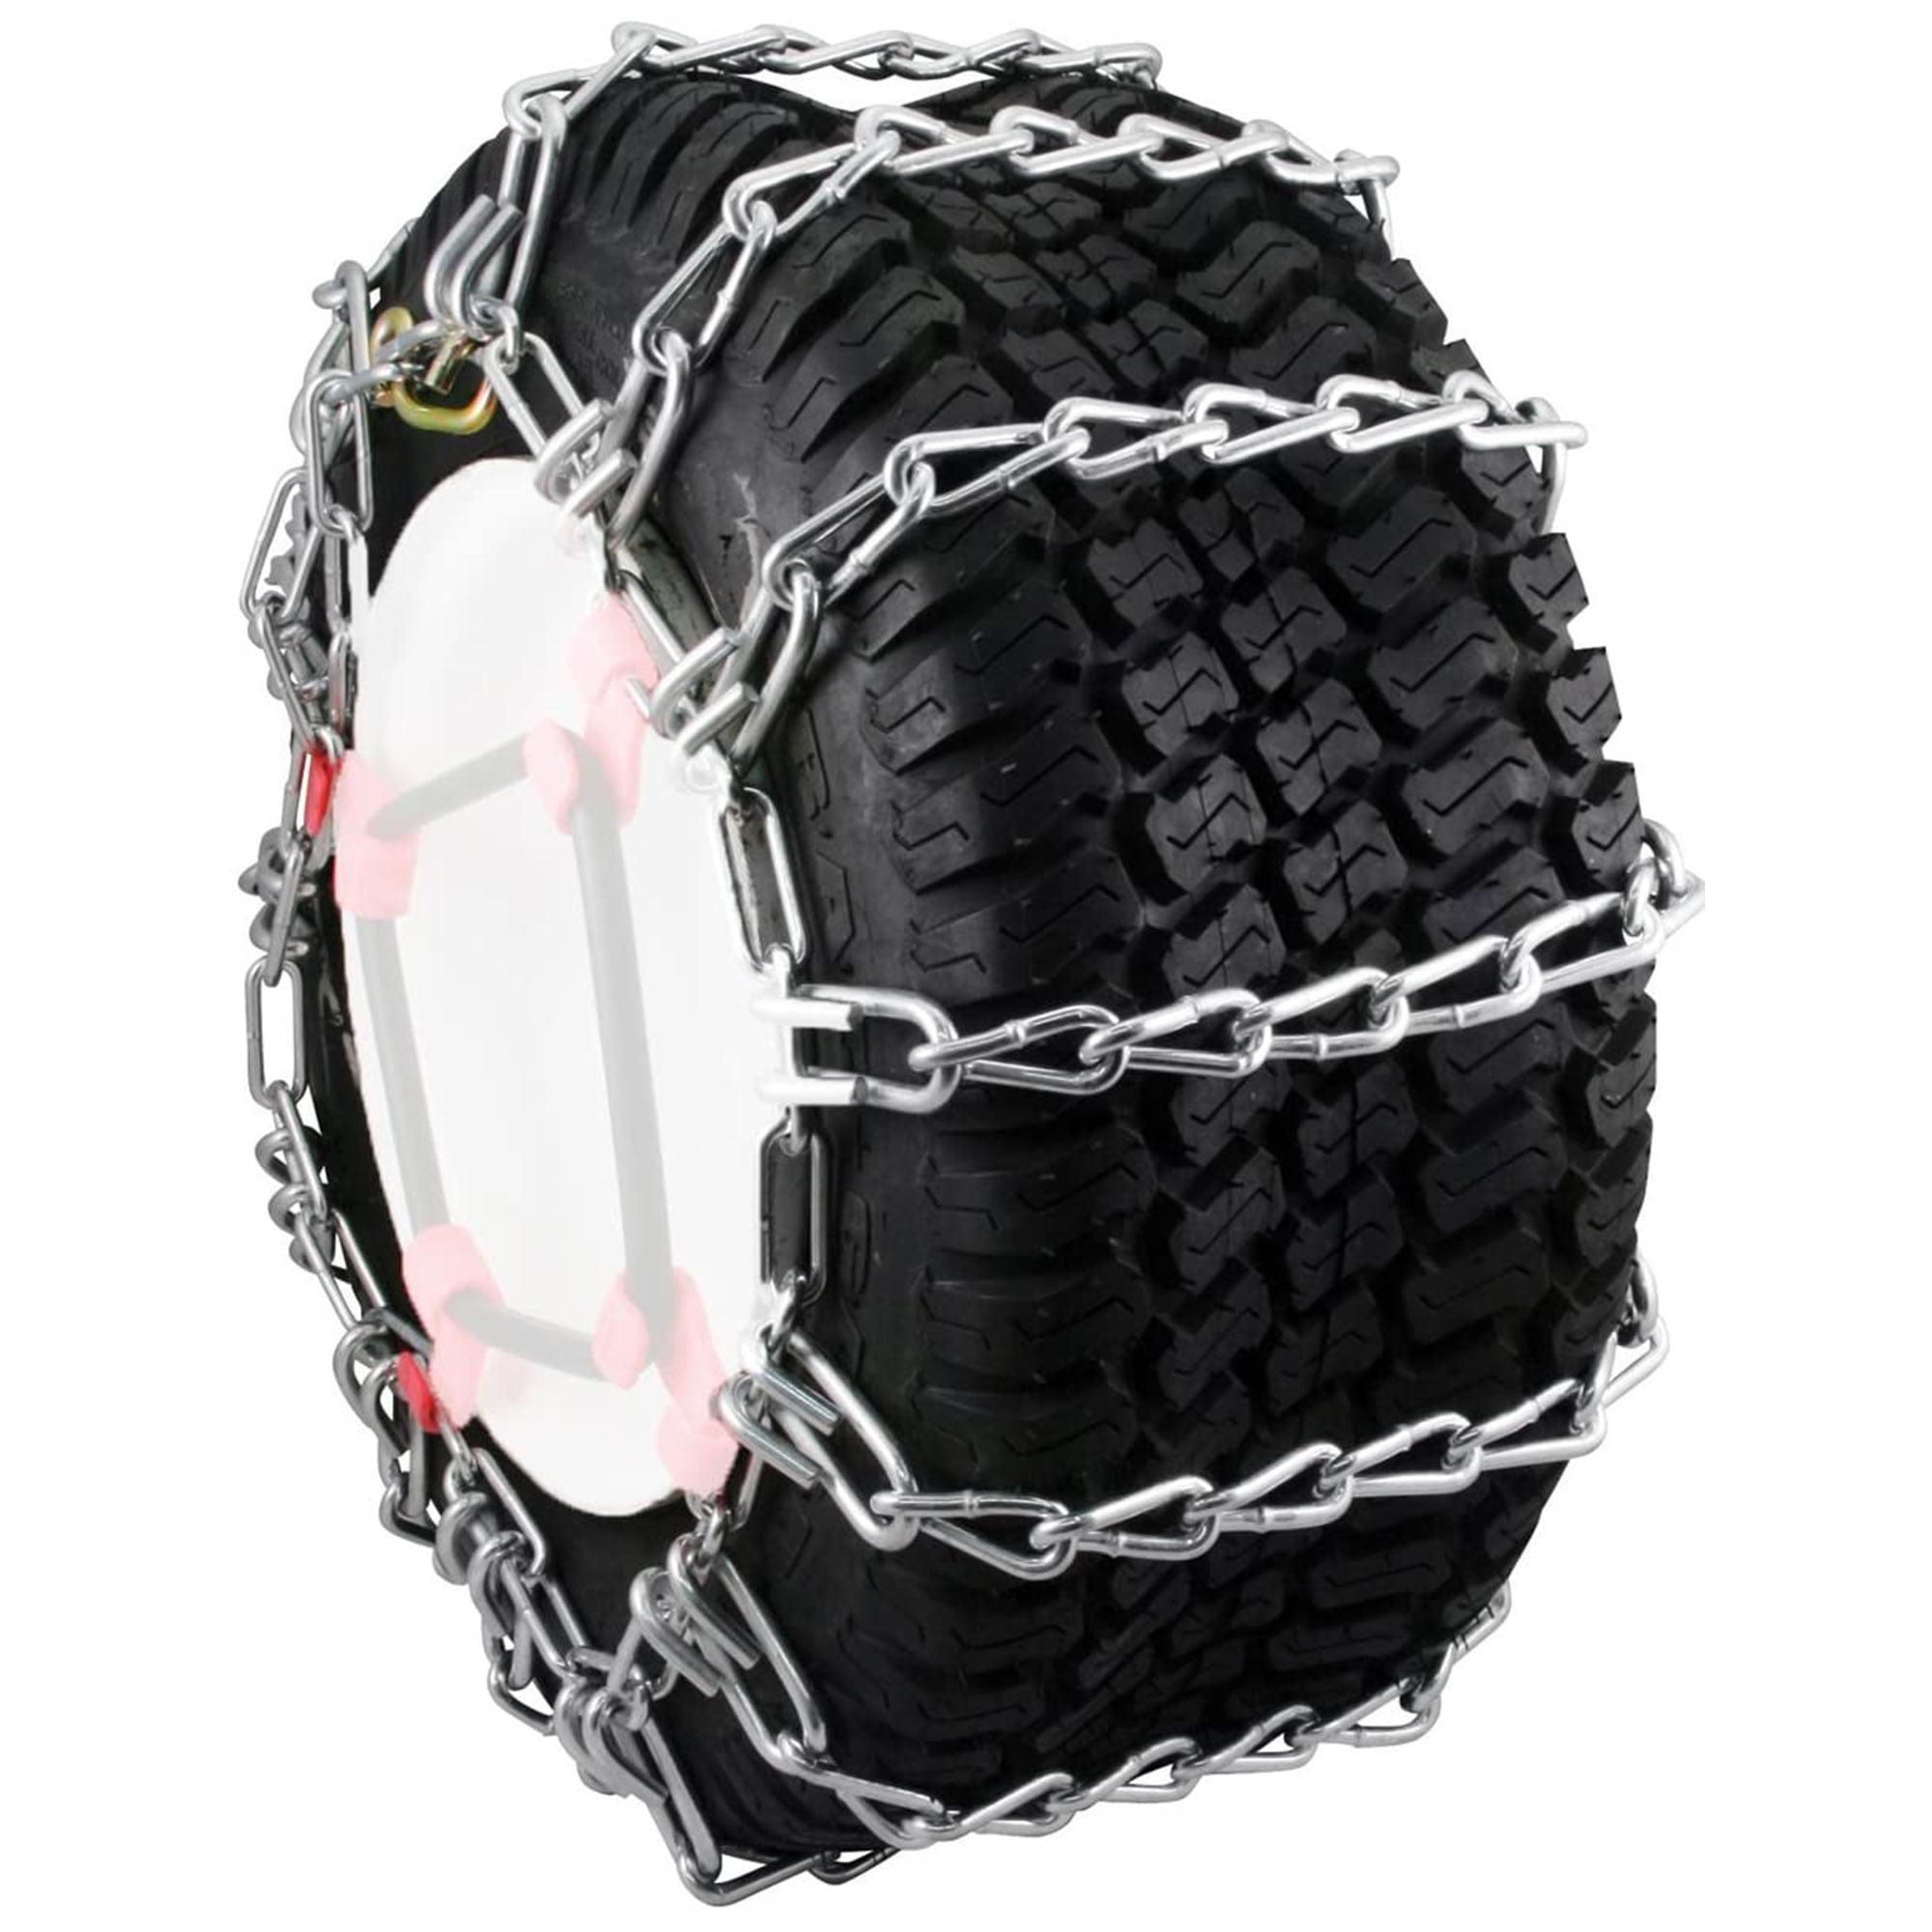 Max Track Zinc-Plated Steel Tire Chains for Snow Blowers and Tractors